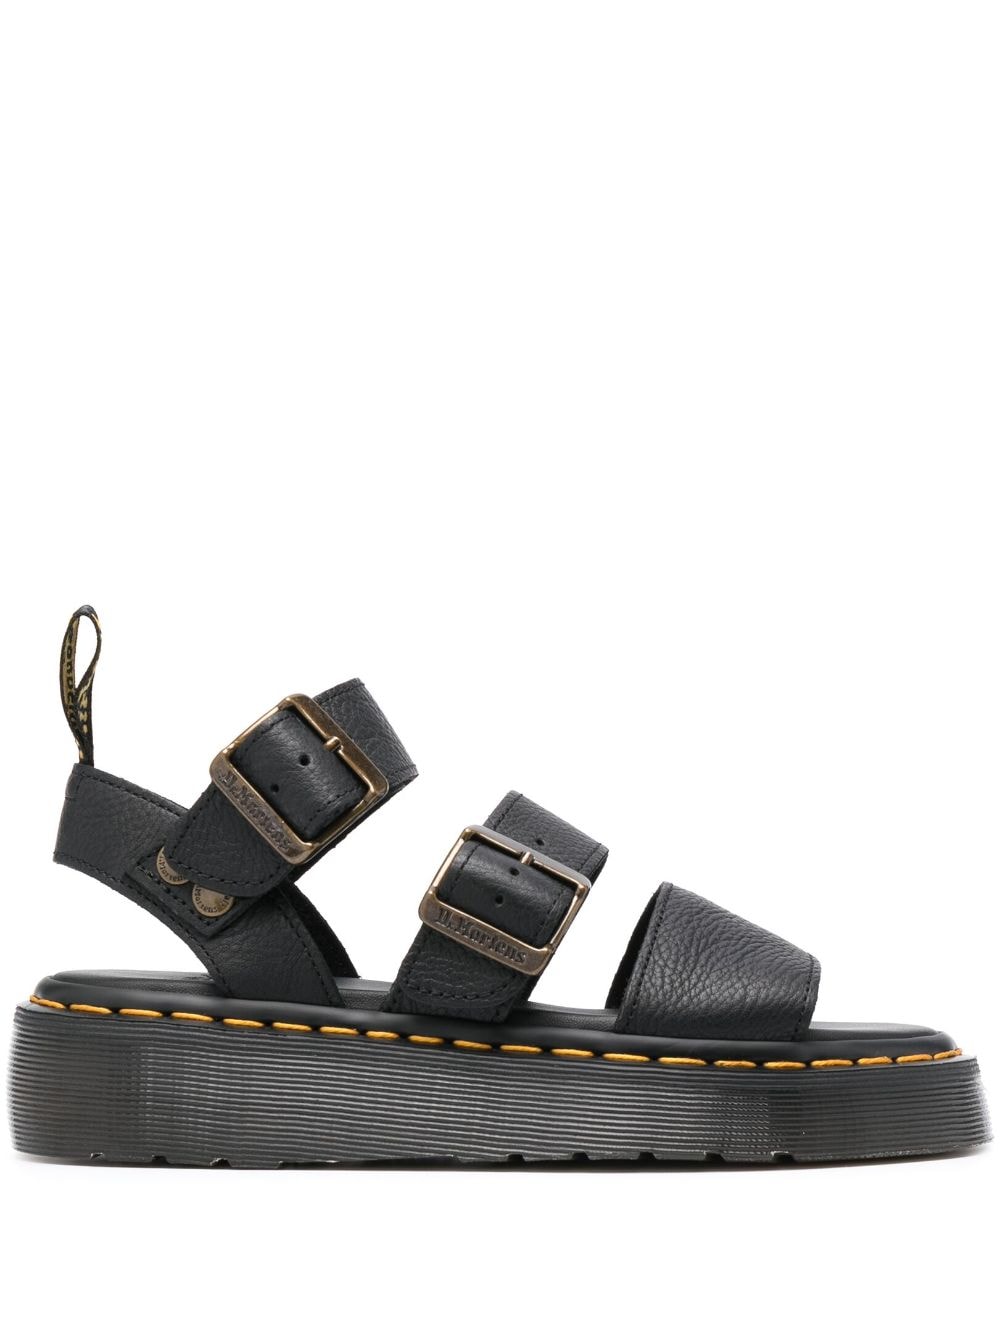 Gryphon 45mm leather sandals